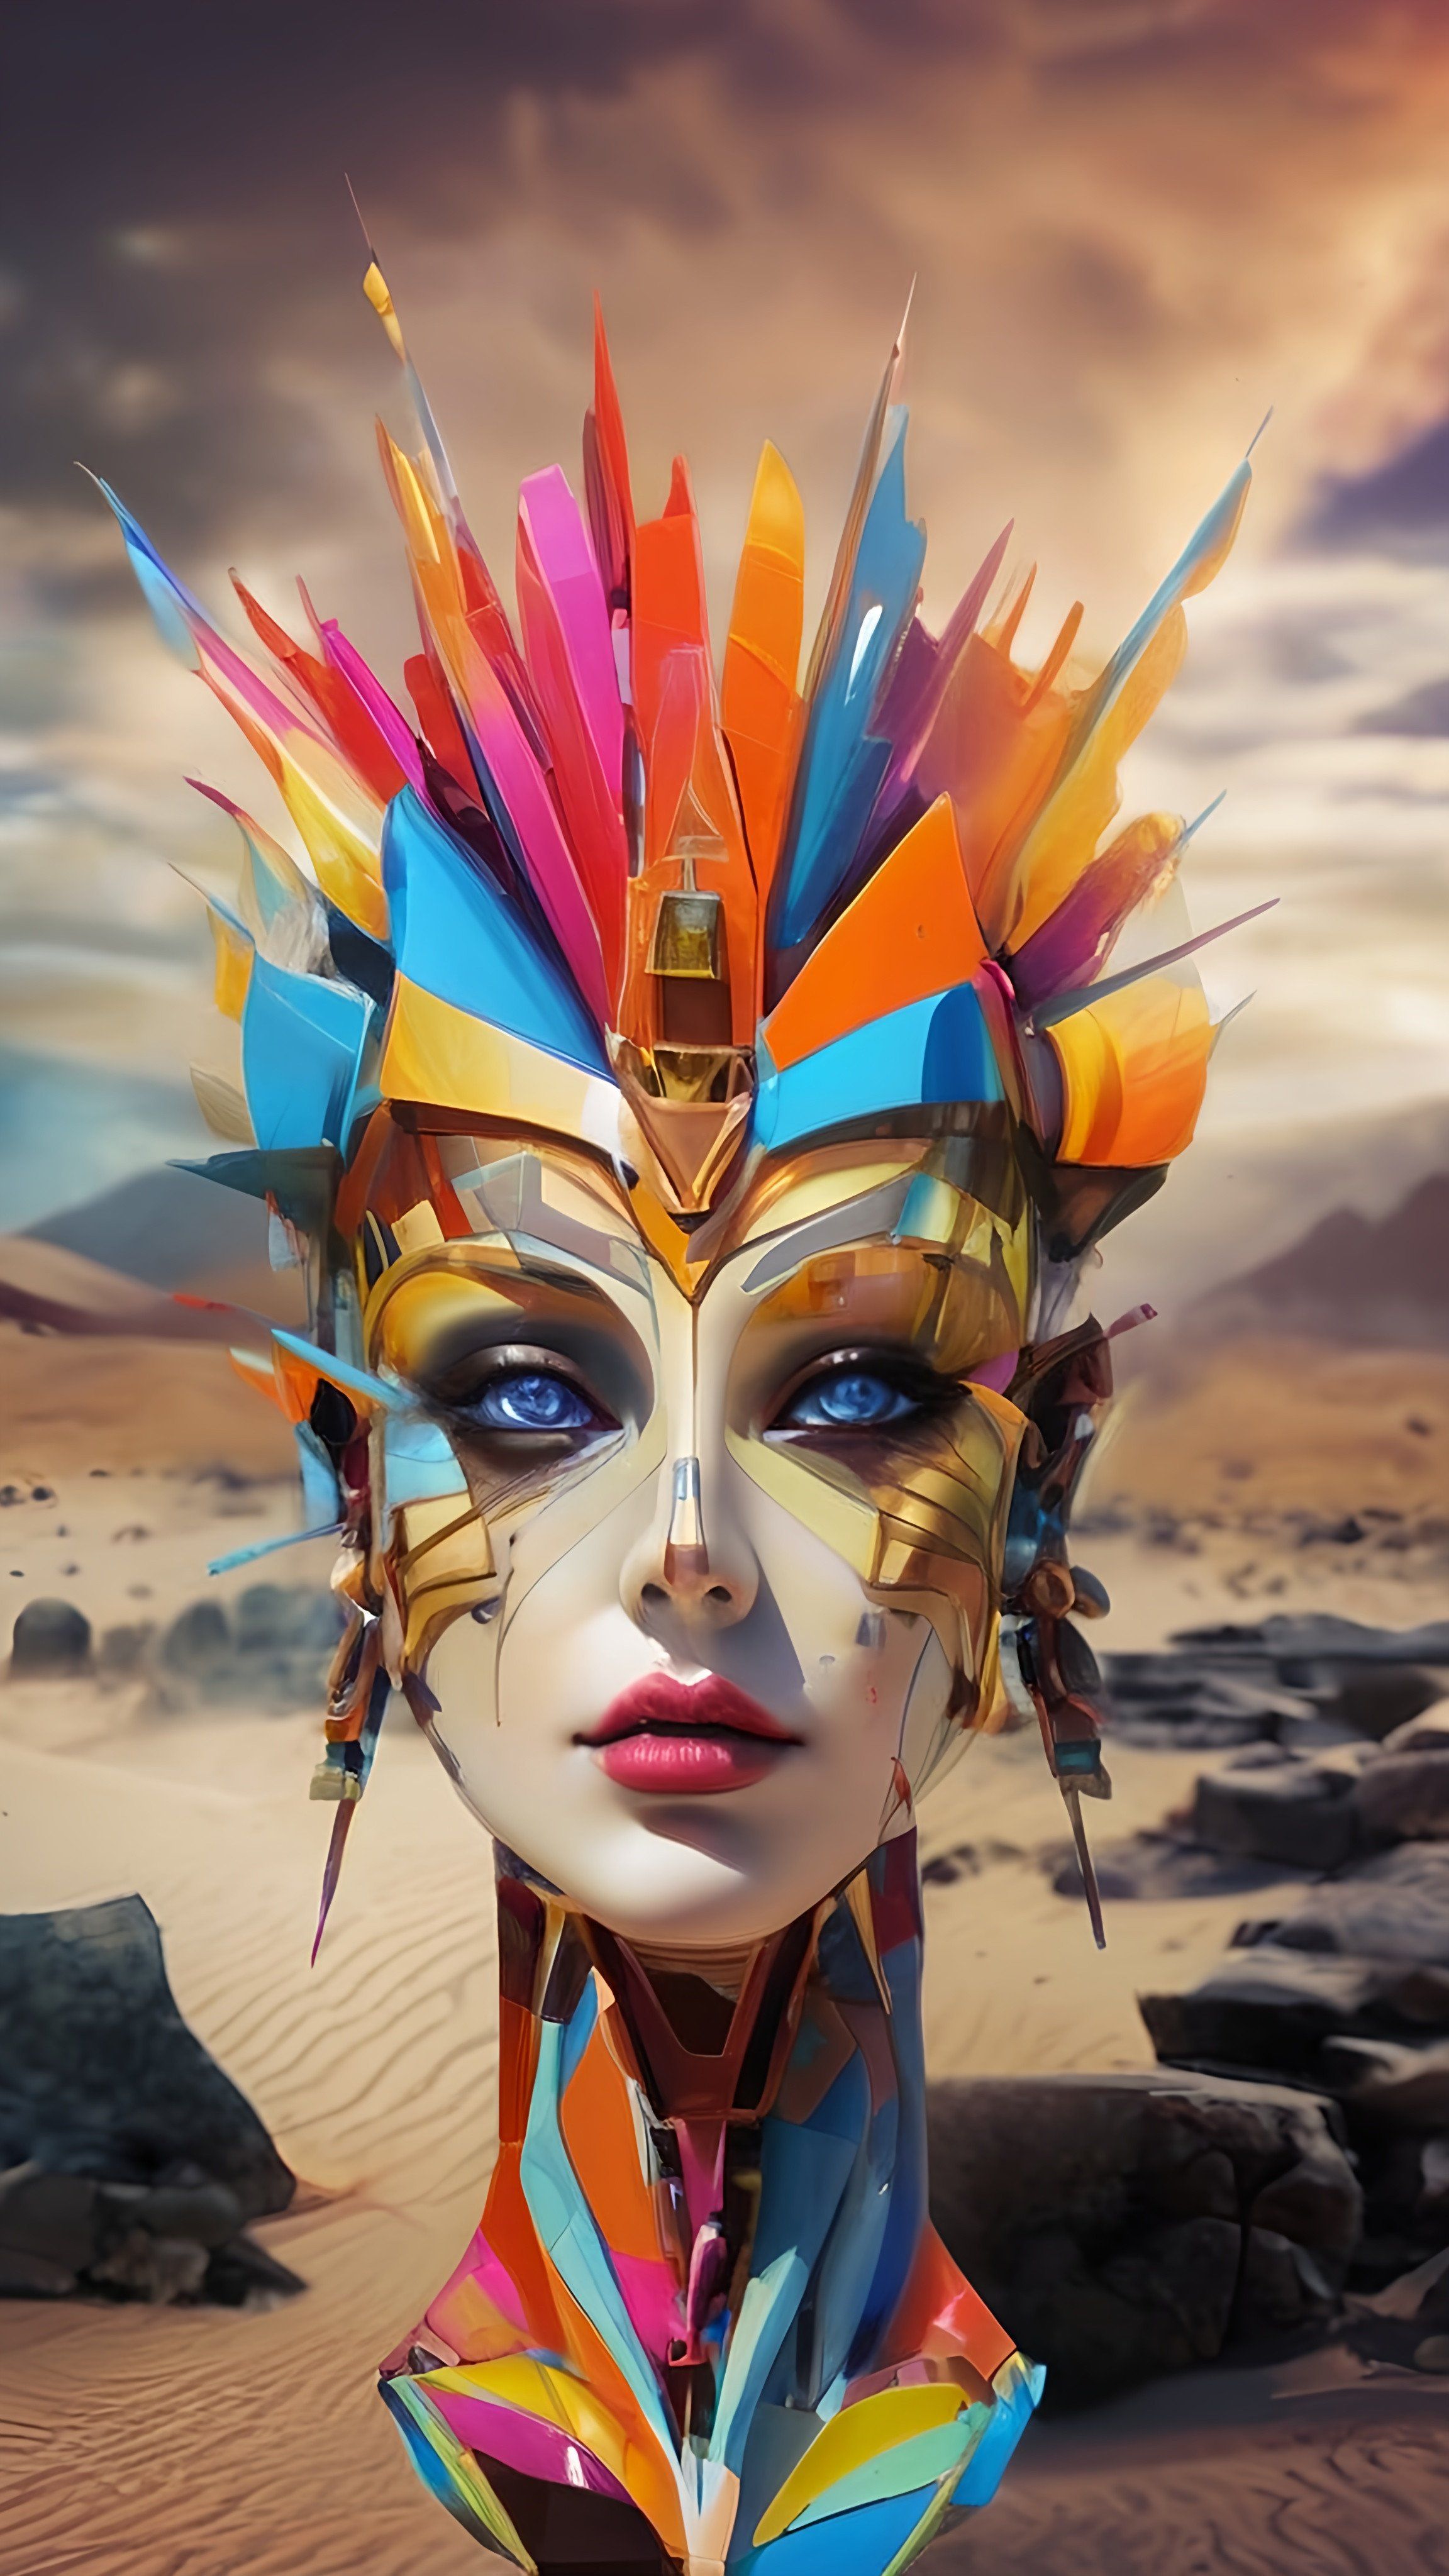 Prompt: a woman with a colorful face and a strange headdress on her head, in the desert with a cloudy sky